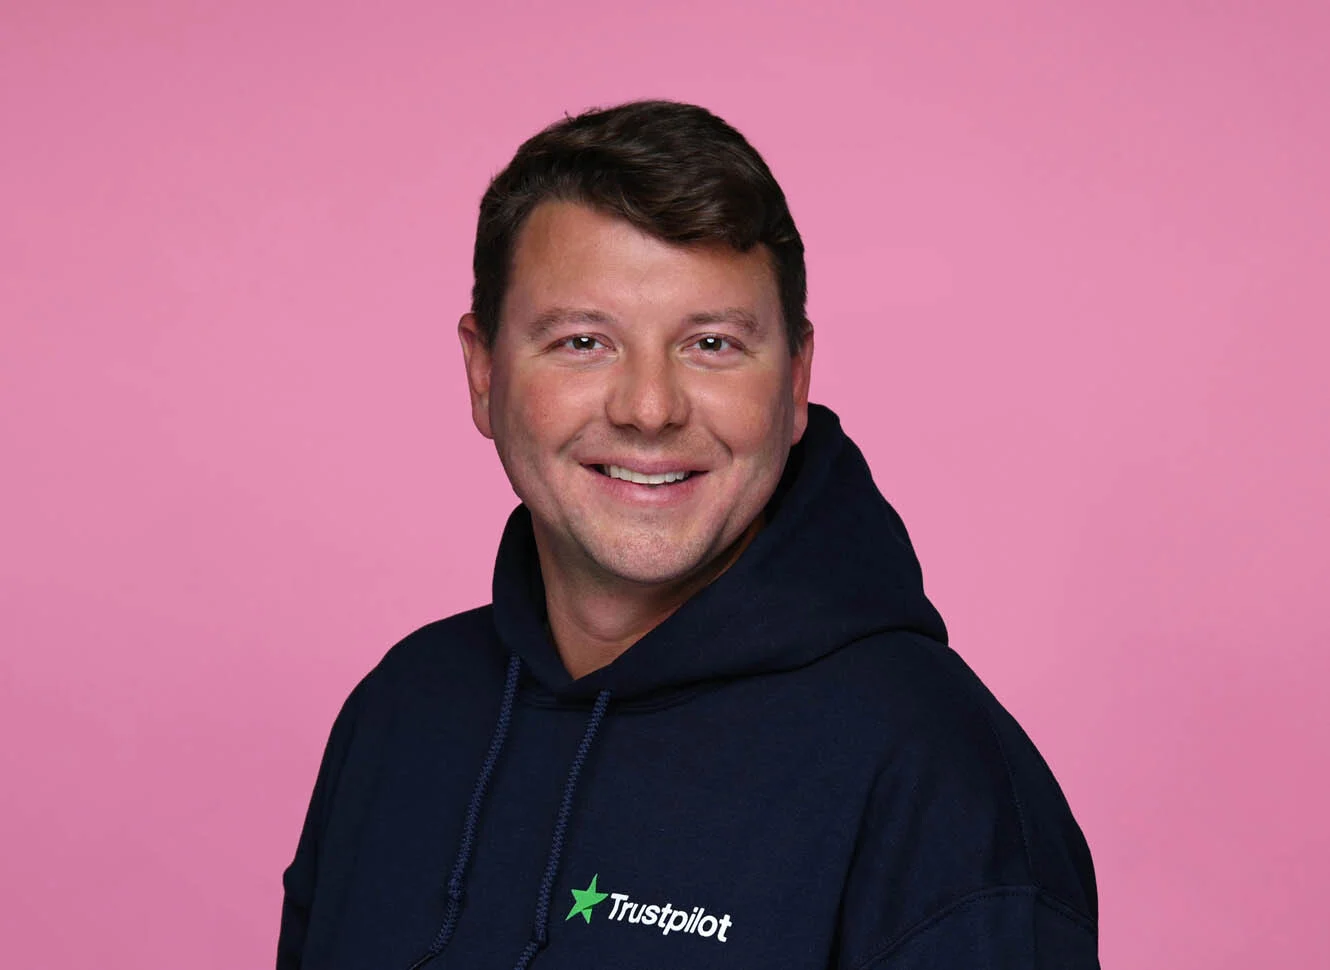 Corporate photo of Jeffrey Paradise, Trustpilot's Senior Commercial Support Manager